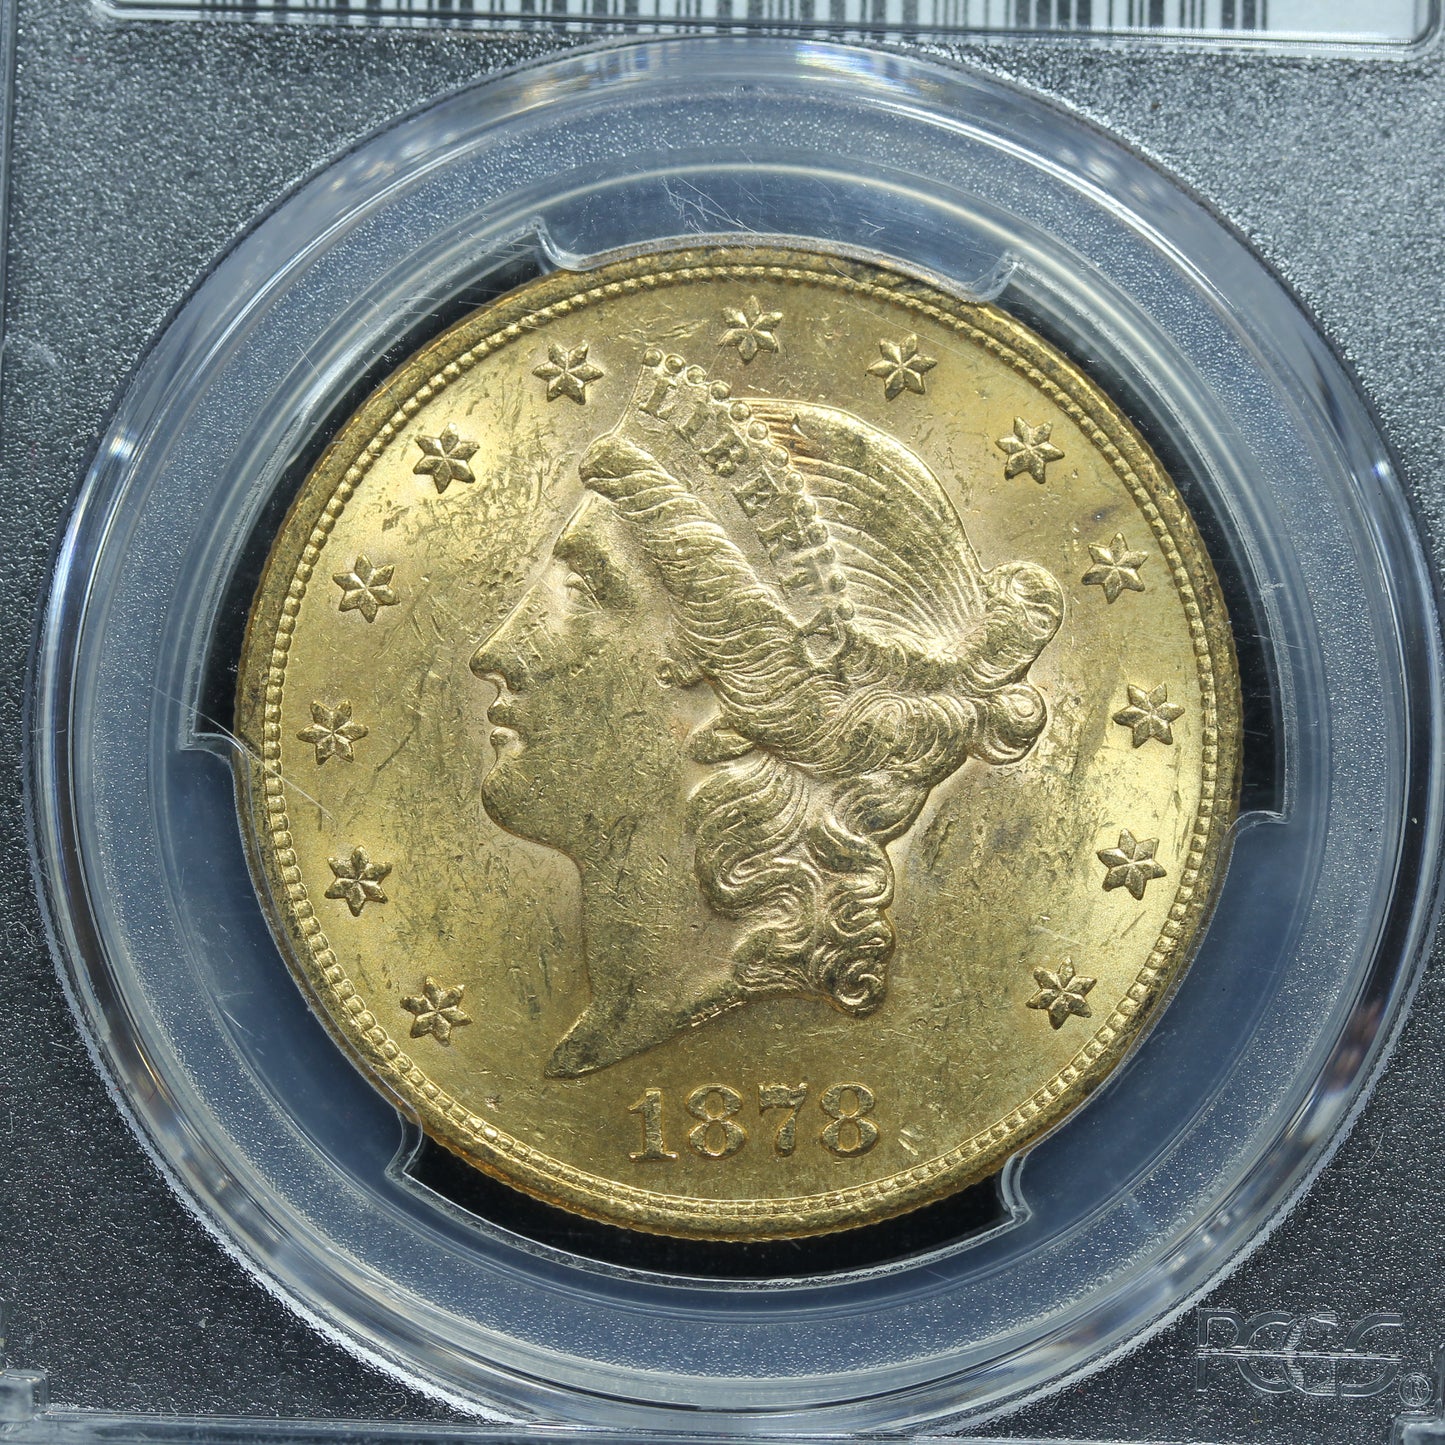 1878 $20 Gold Liberty Head Double Eagle Coin - PCGS MS 60